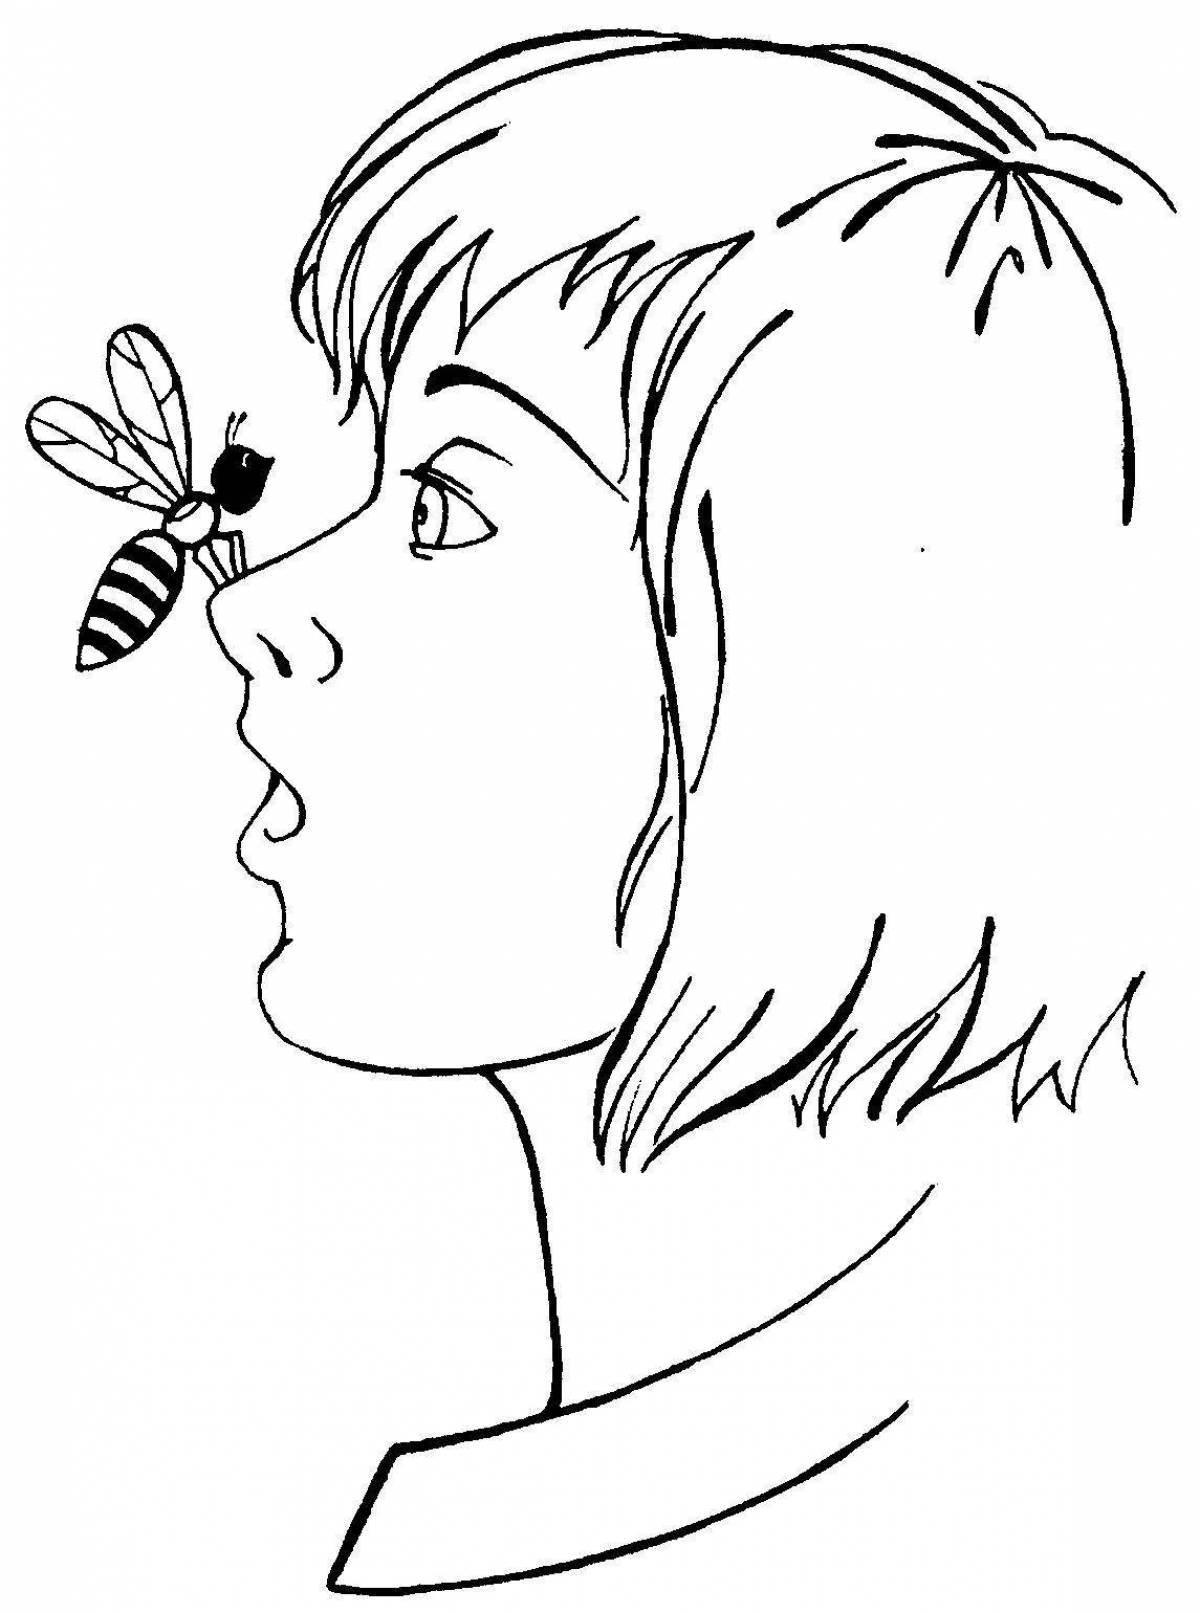 Colorful nose coloring page for kids